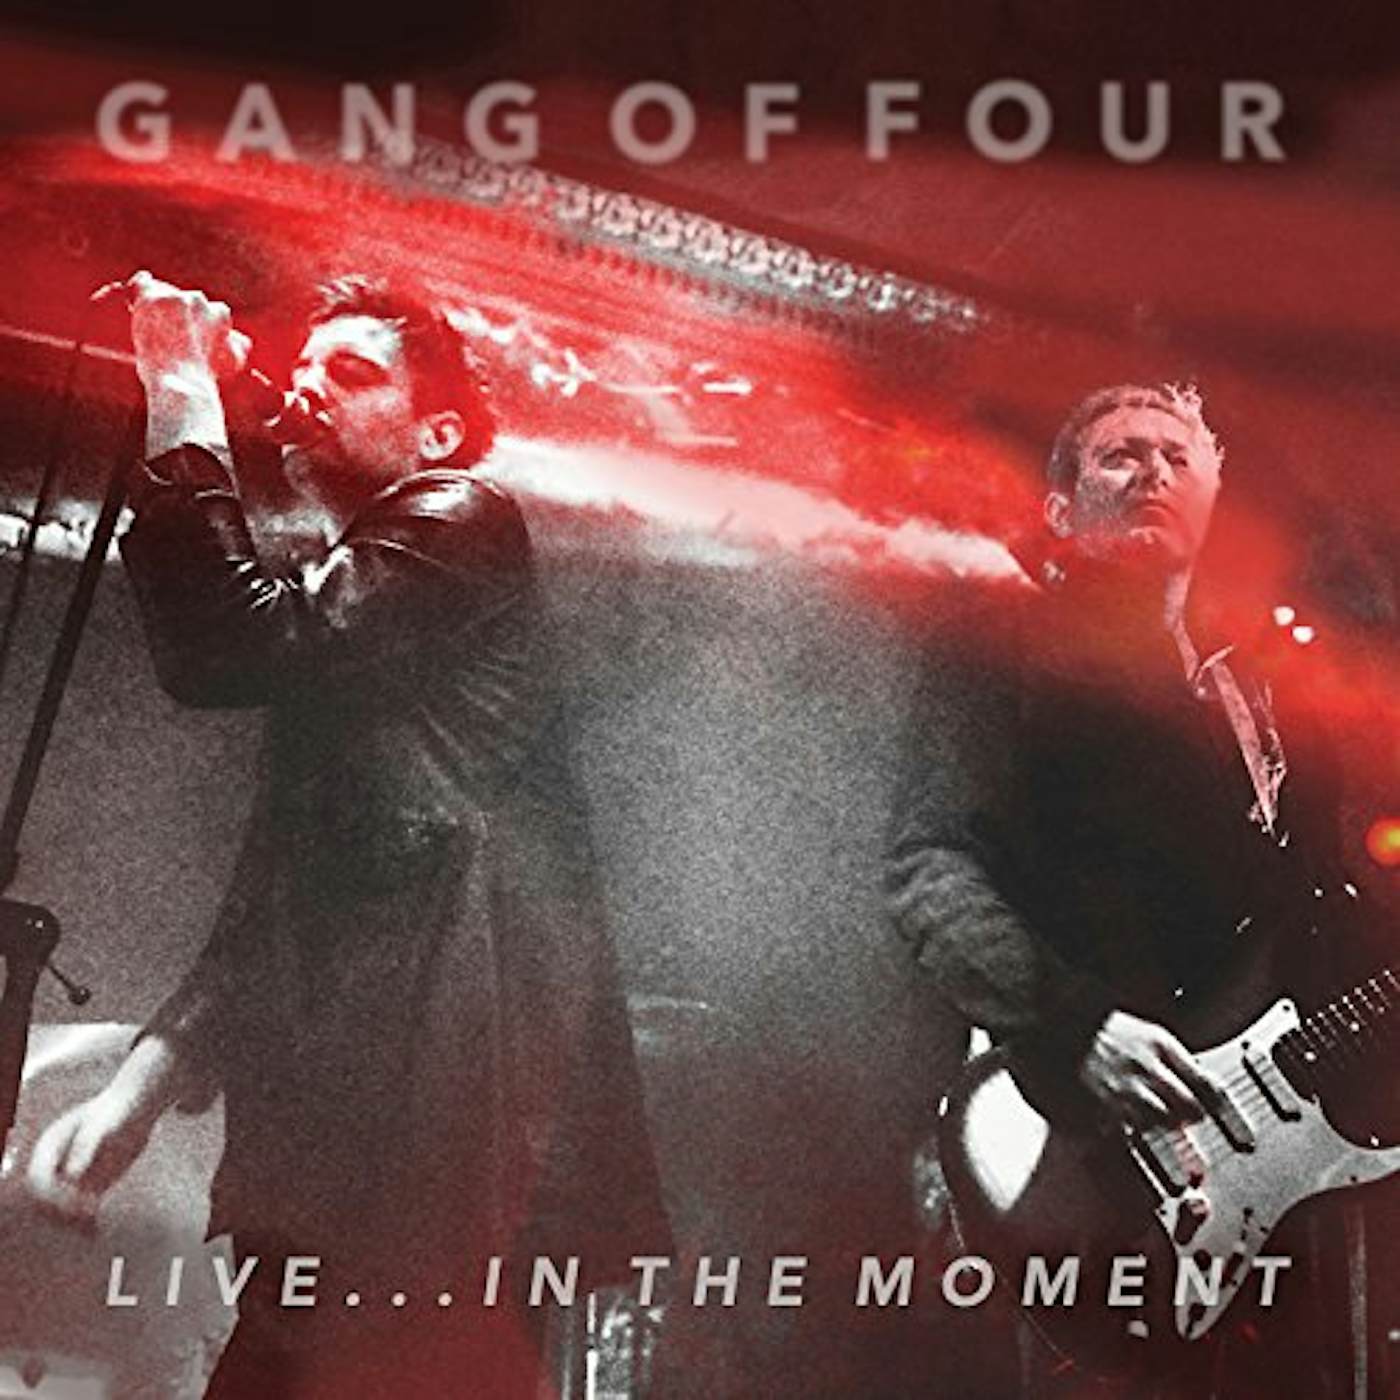 Gang Of Four LIVE... IN THE MOMENT CD